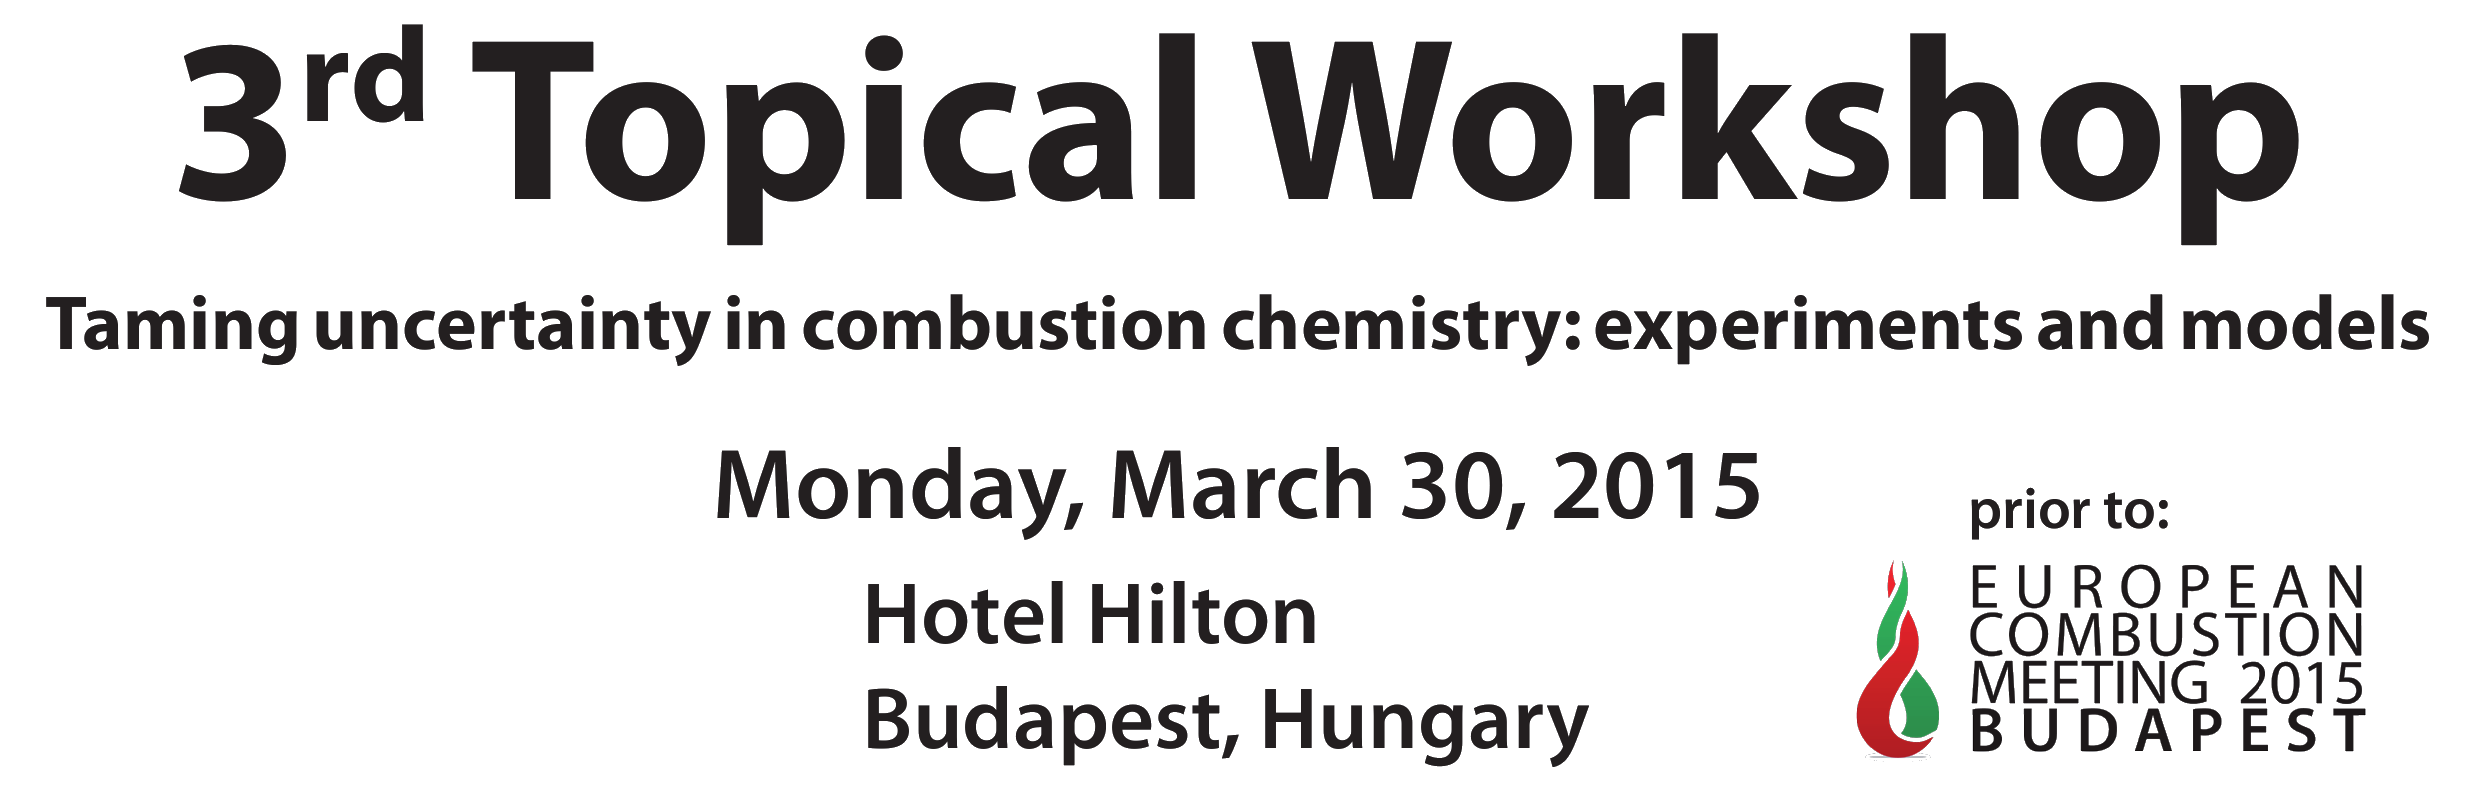 3rd Topical Workshop - Taming uncertainty in combustion chemistry: experiments and models